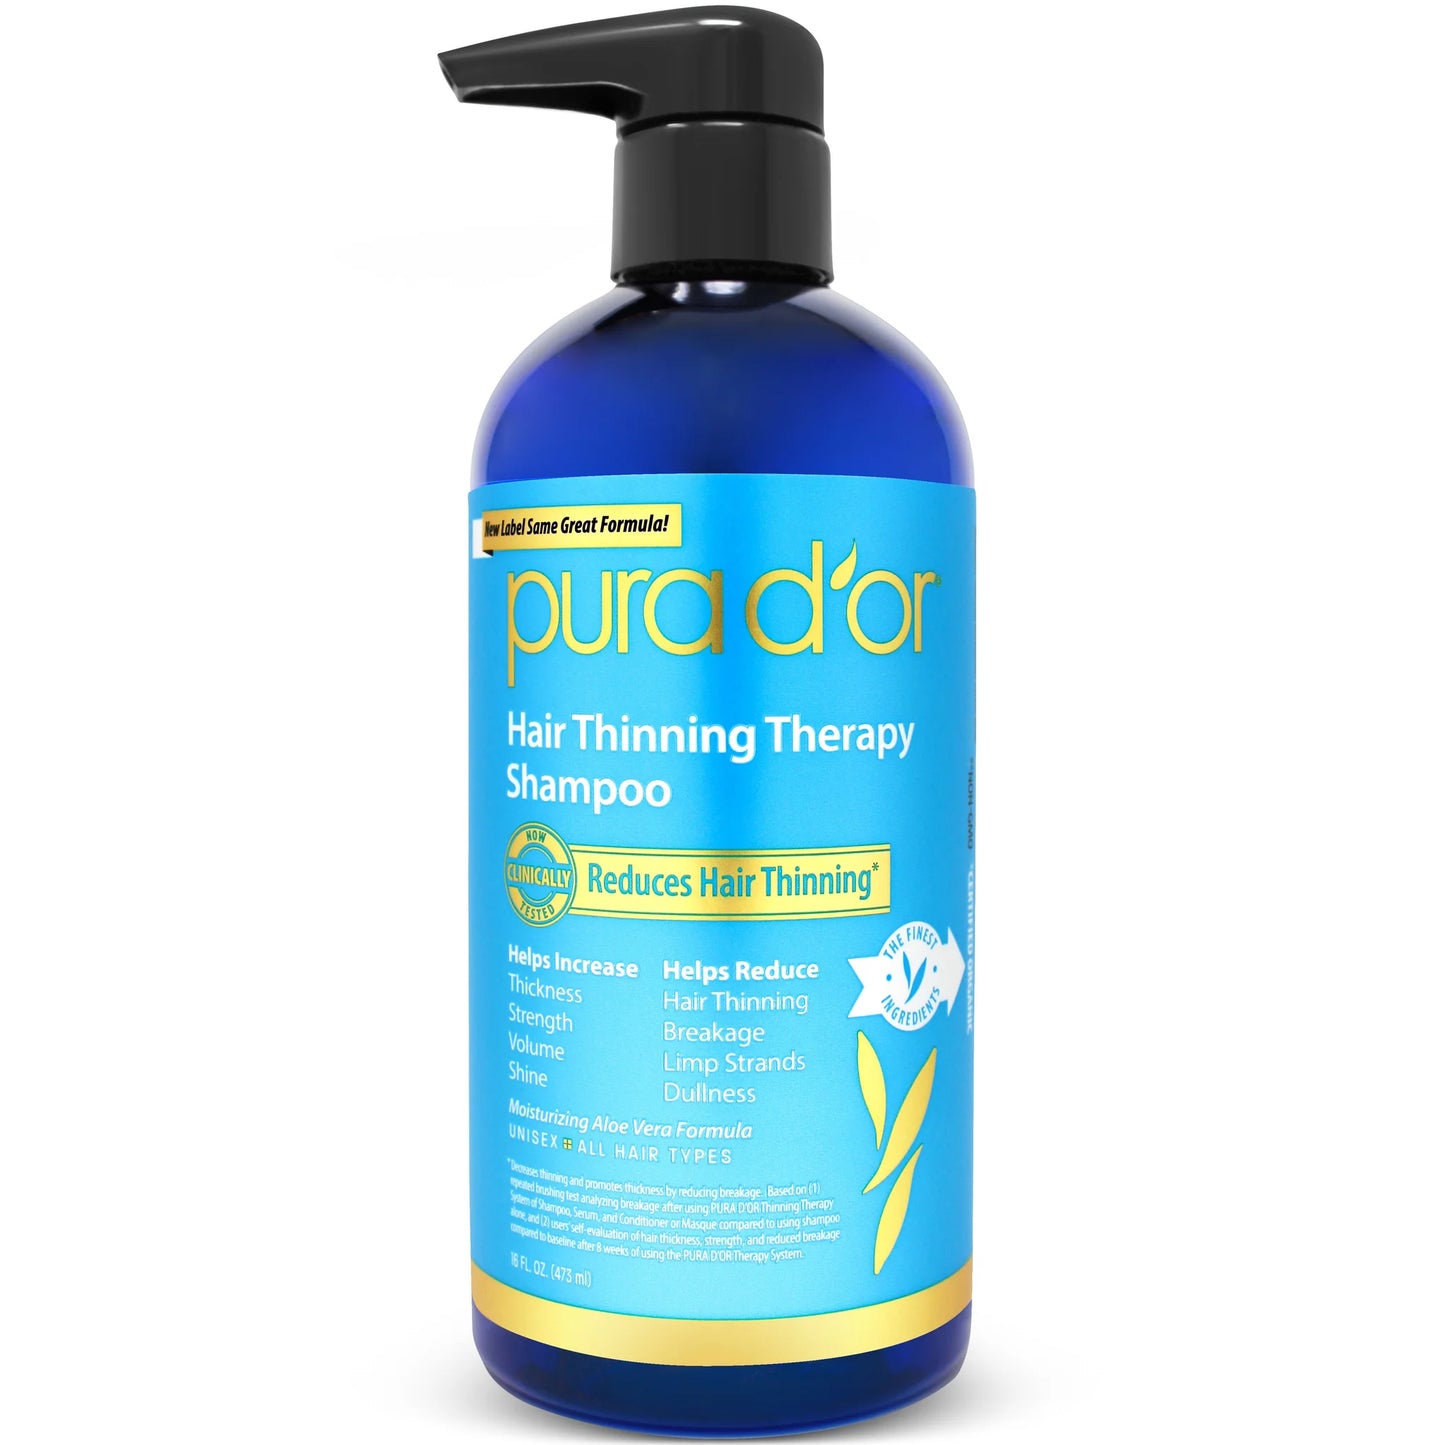 Hair Thinning Therapy Shampoo